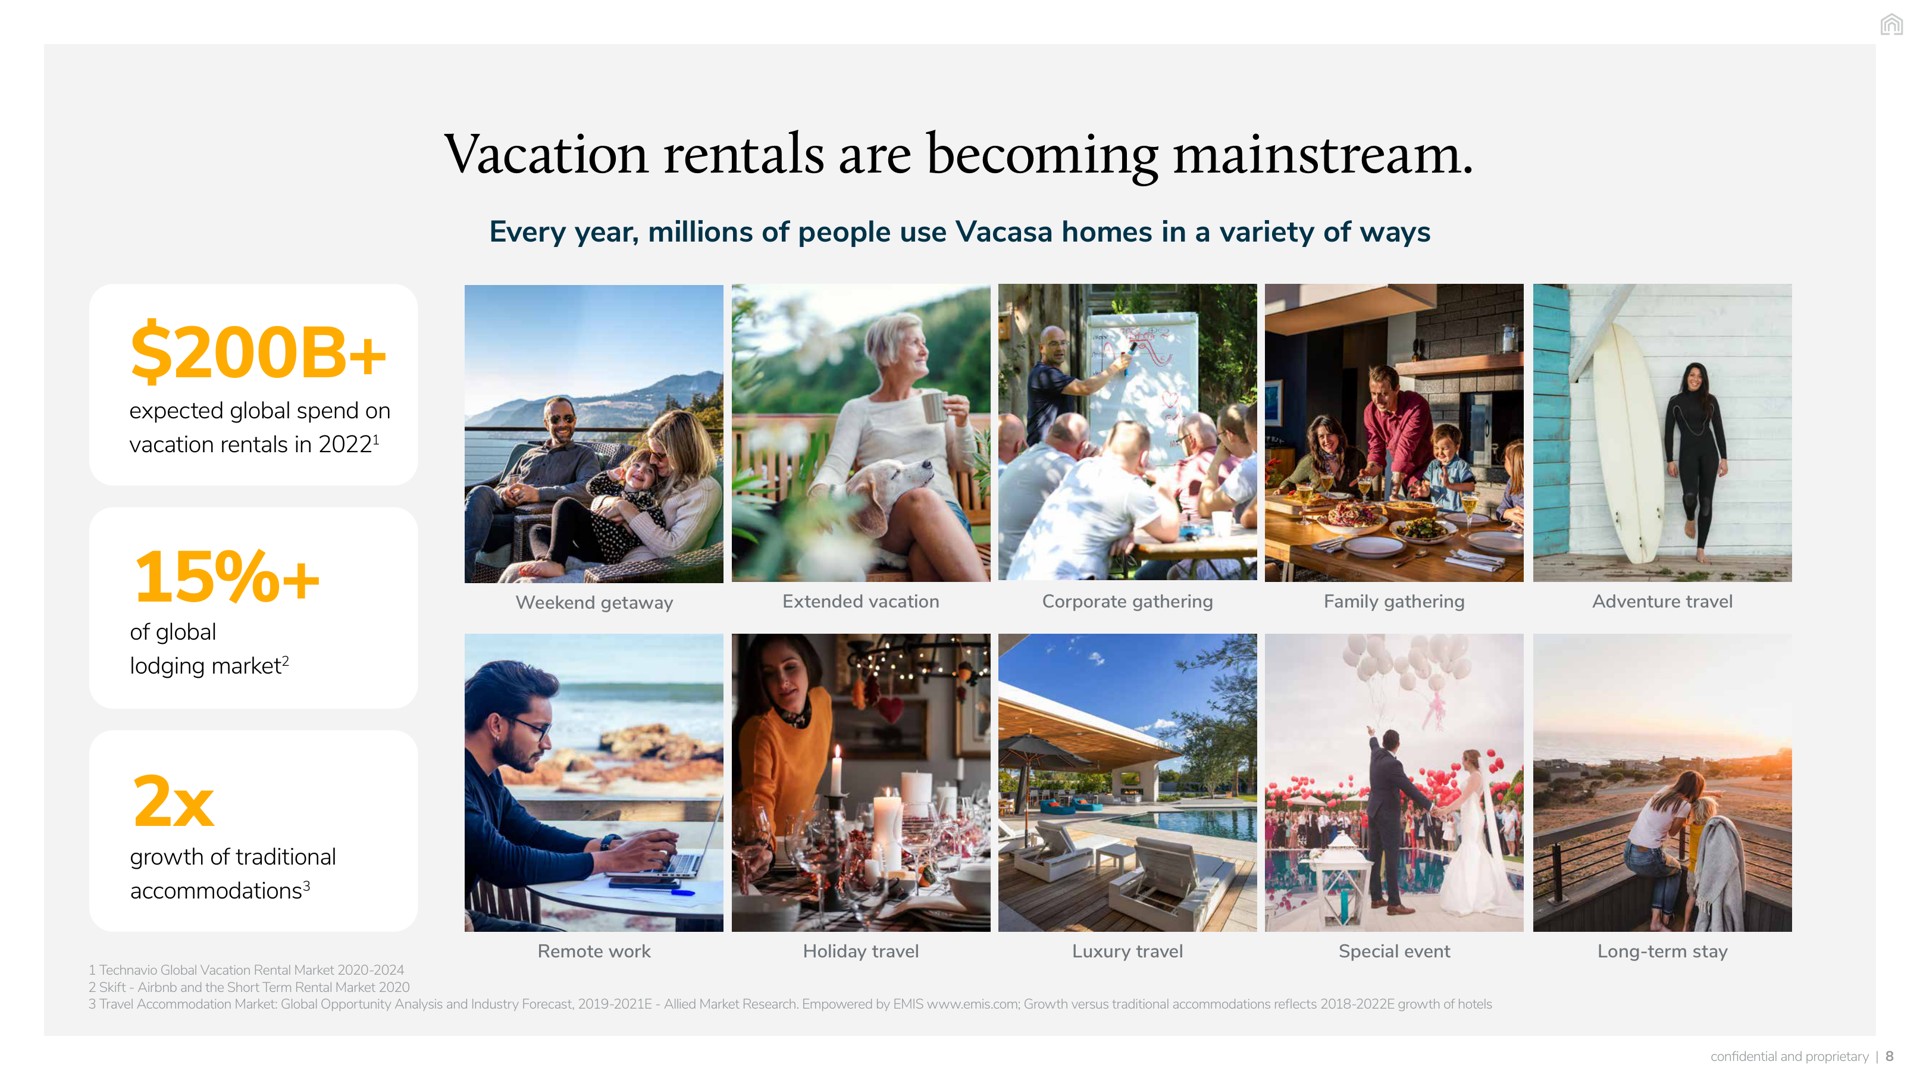 vacation rentals are becoming every year millions of people use homes in a variety of ways expected global spend on in of global lodging market growth of traditional accommodations family gathering adventure travel remote work holiday travel luxury travel special event long term stay | Vacasa